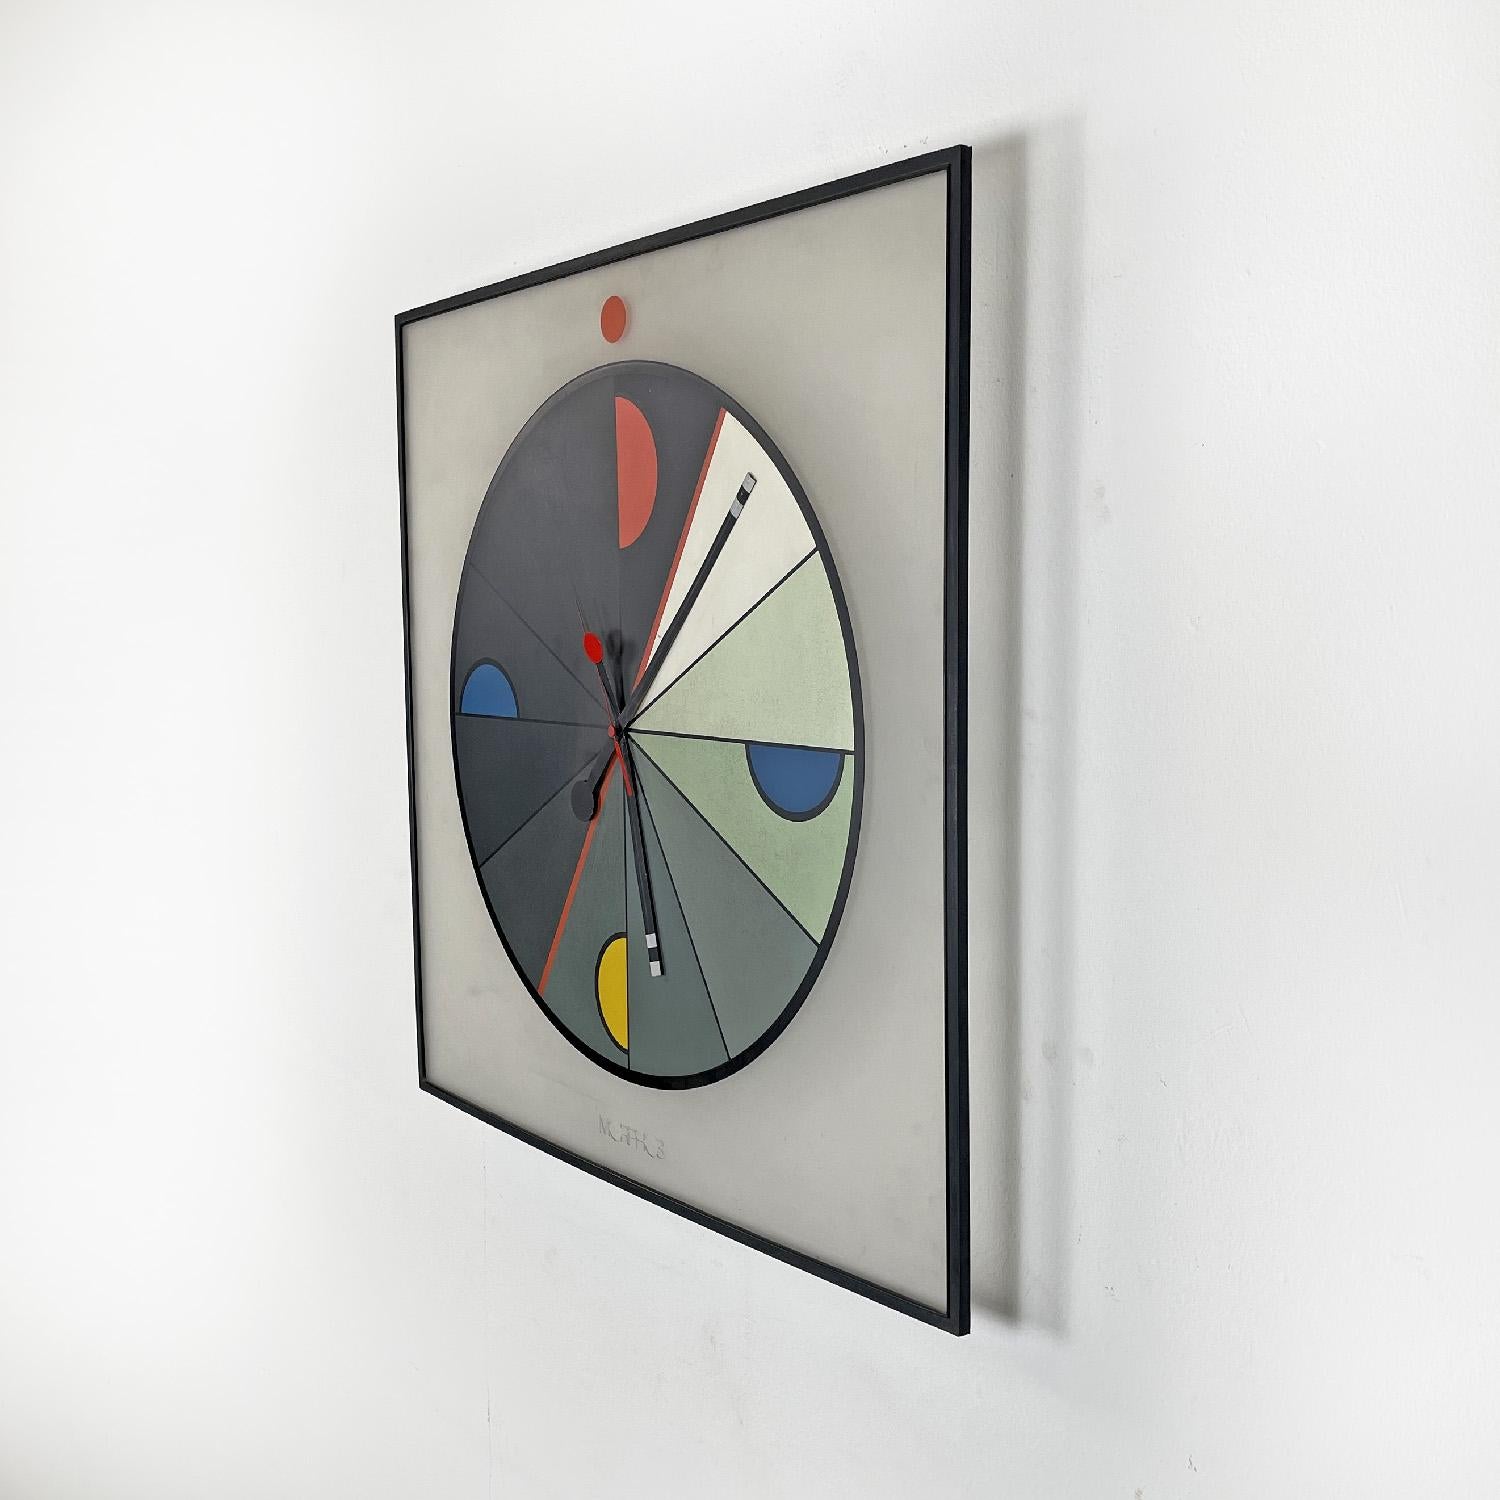 Italian modern square plastic wall clock by Kurt B. Delbanco for Morphos, 1980s
Square plastic wall clock. The dial features a geometric and graphic design with primary colors, black and gray. The hands are in black and red lacquered metal. The